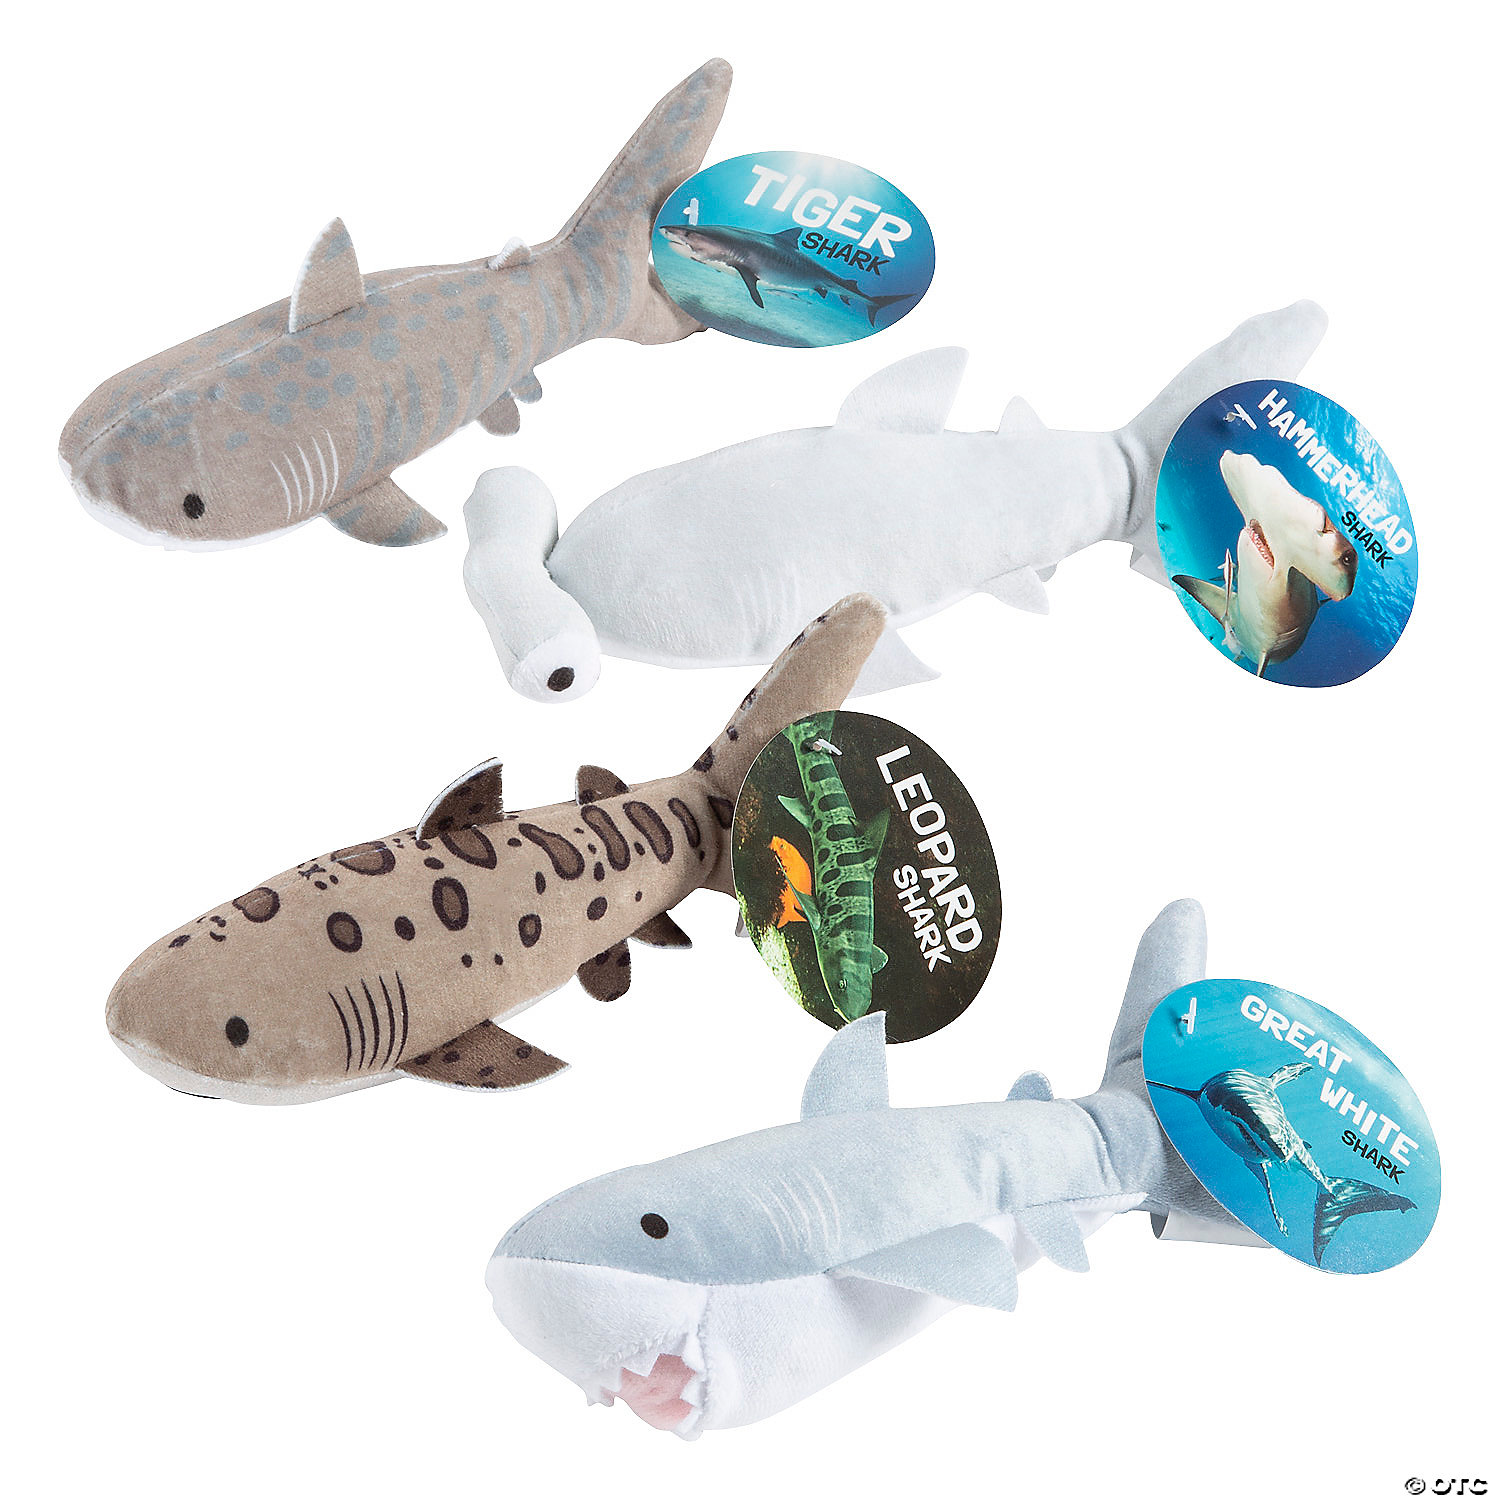 https://s7.orientaltrading.com/is/image/OrientalTrading/VIEWER_ZOOM/discovery-shark-week-stuffed-sharks-with-card~14112229